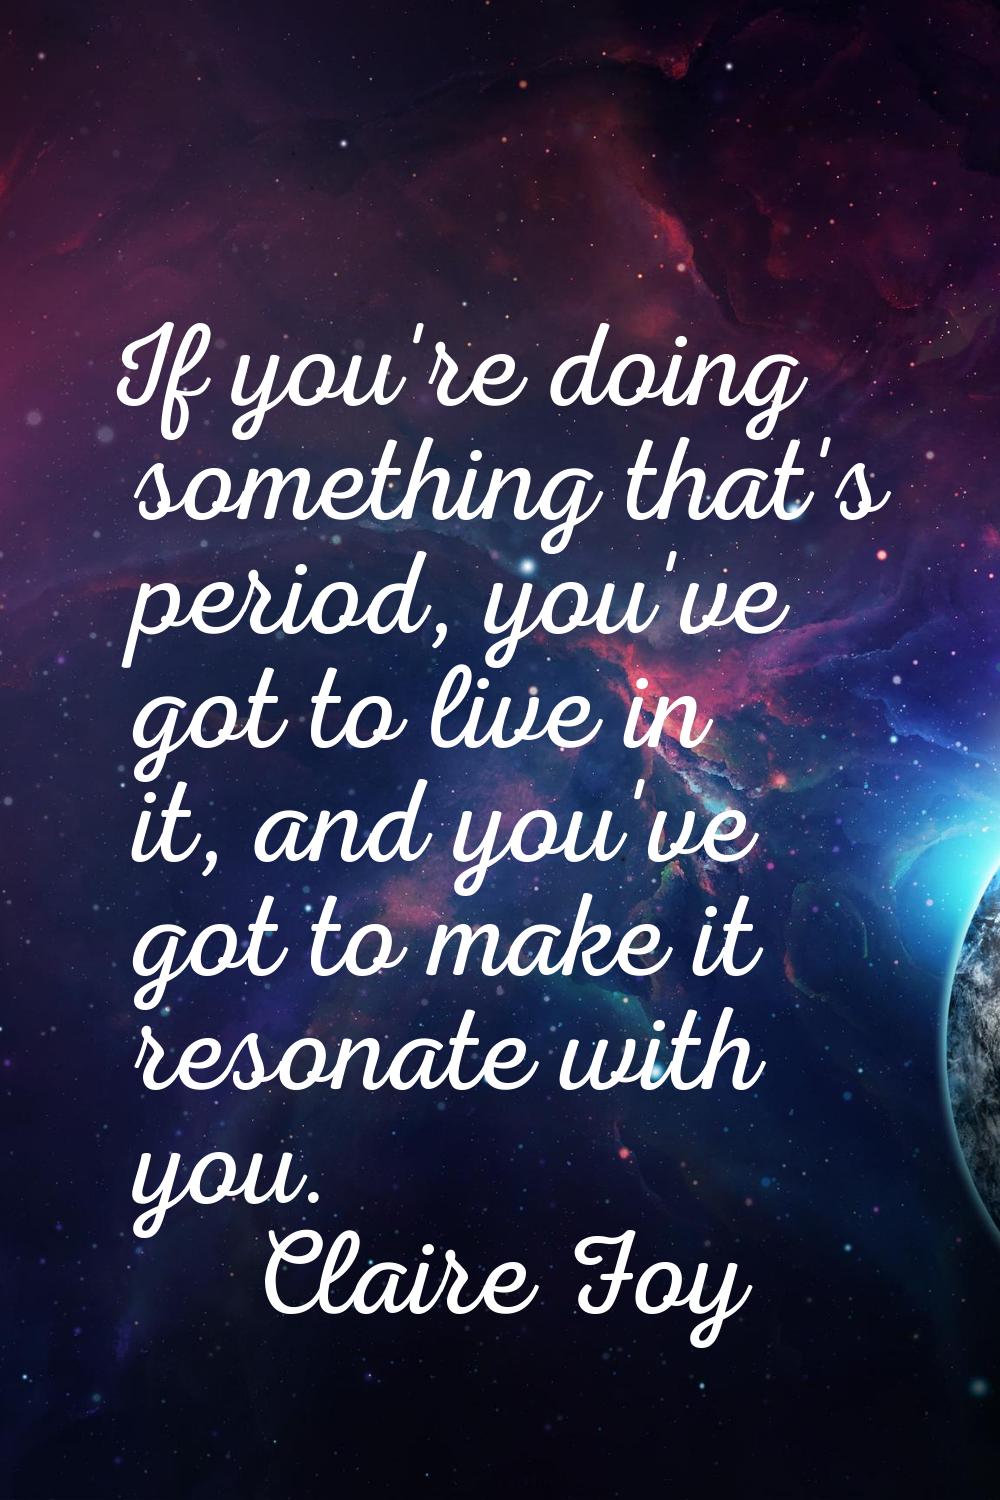 If you're doing something that's period, you've got to live in it, and you've got to make it resona